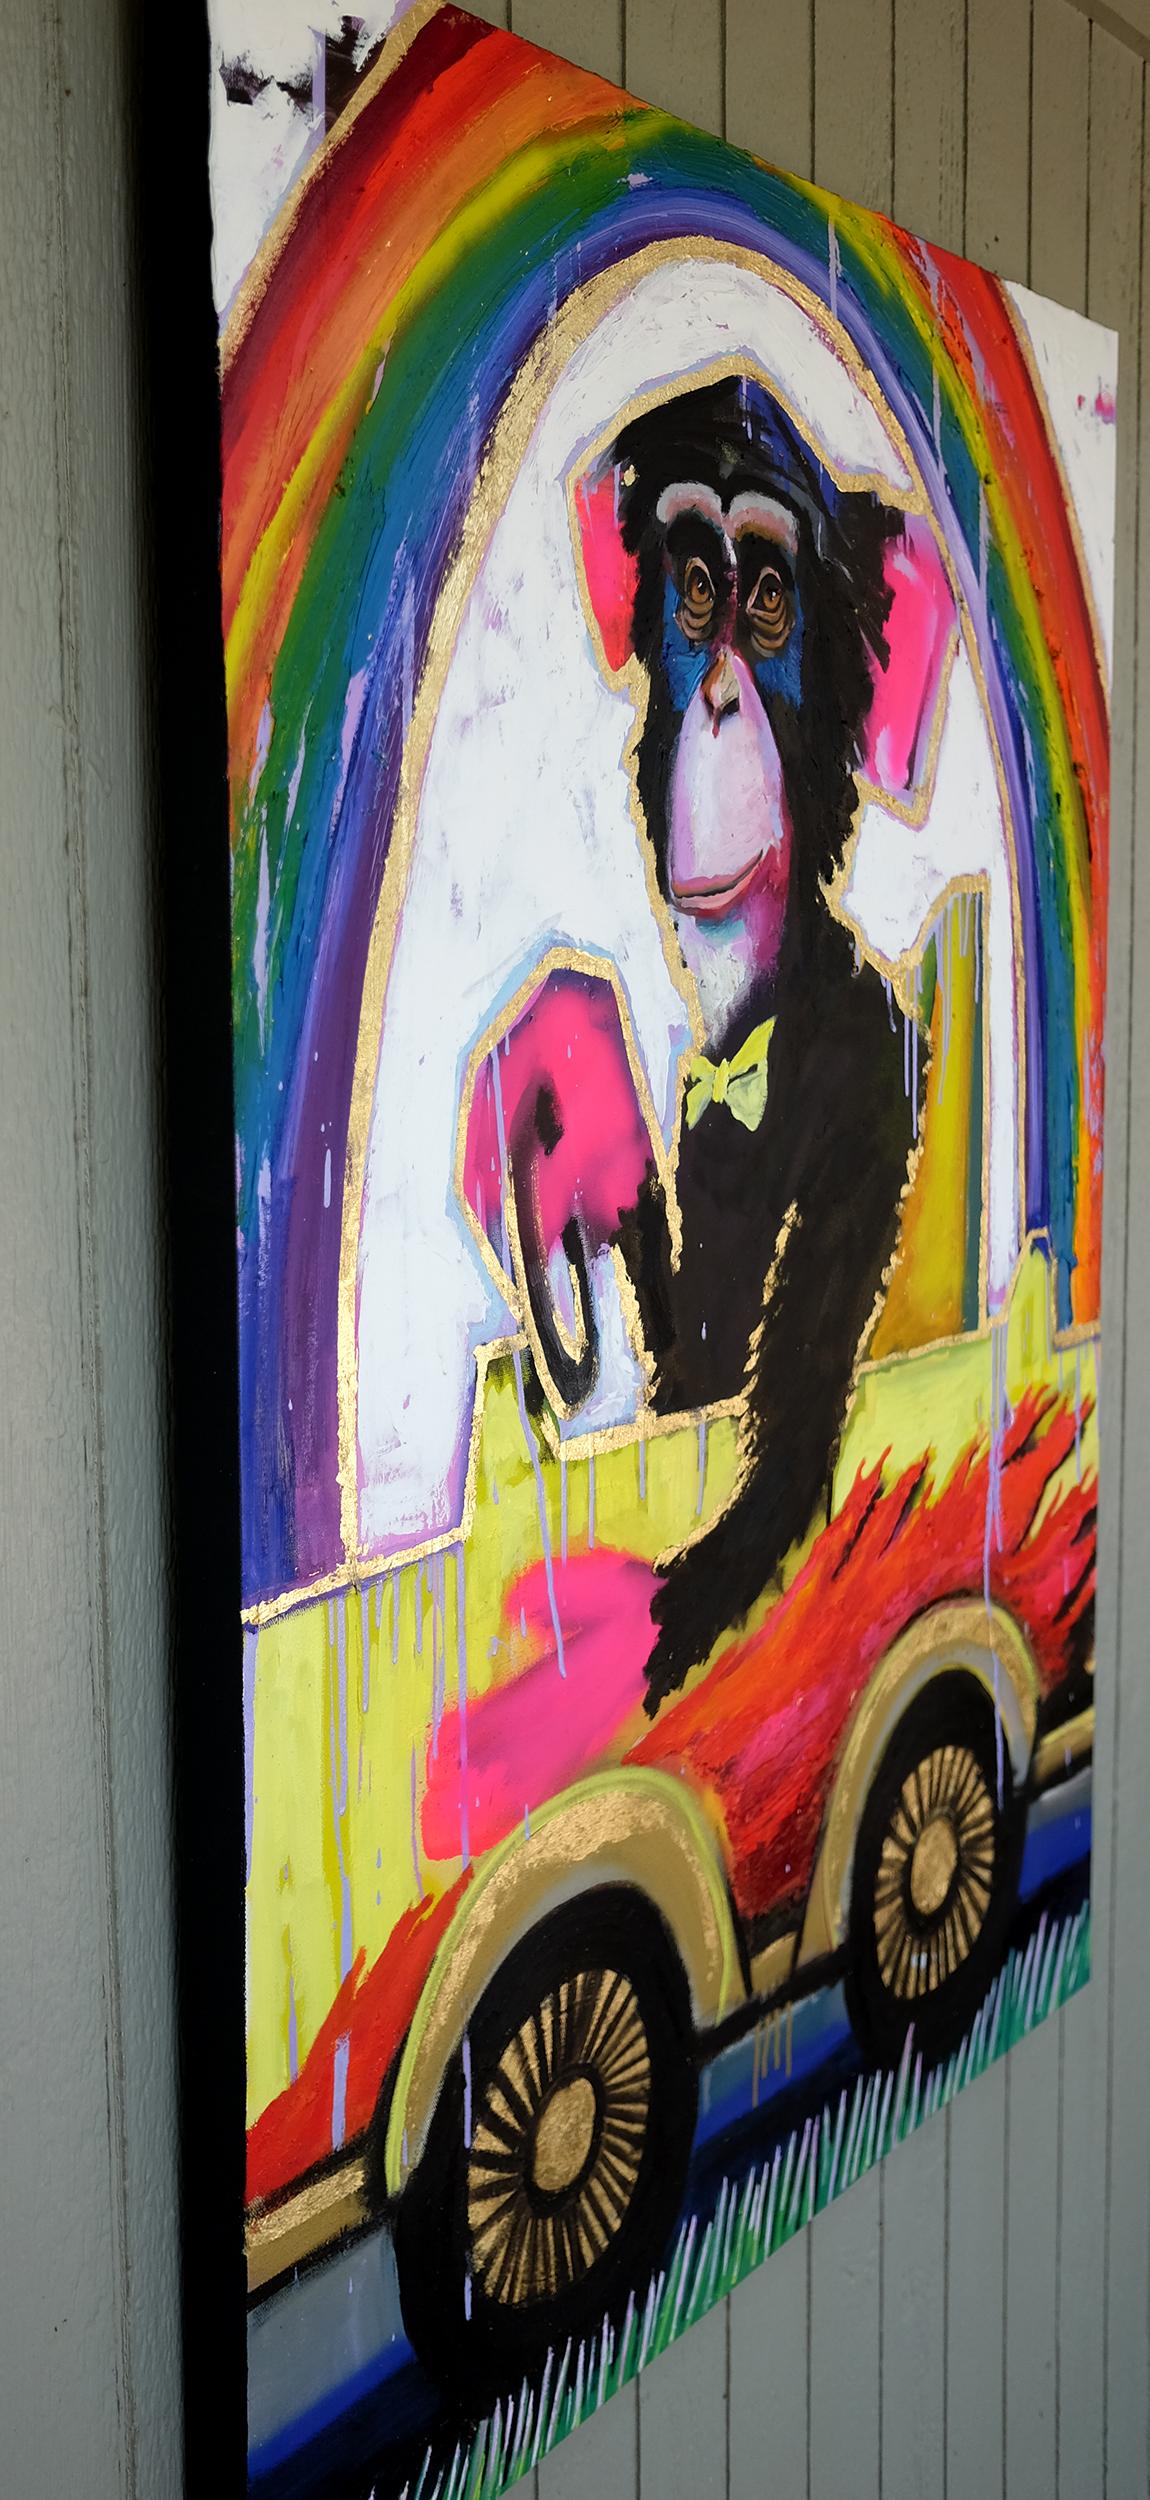 <p>Artist Comments<br>Artist Scott Dykema depicts a chimpanzee riding a yellow car with flaming orange decals. He delivers a distinct statement piece using striking colors in his signature street art style. Part of his series of works with the